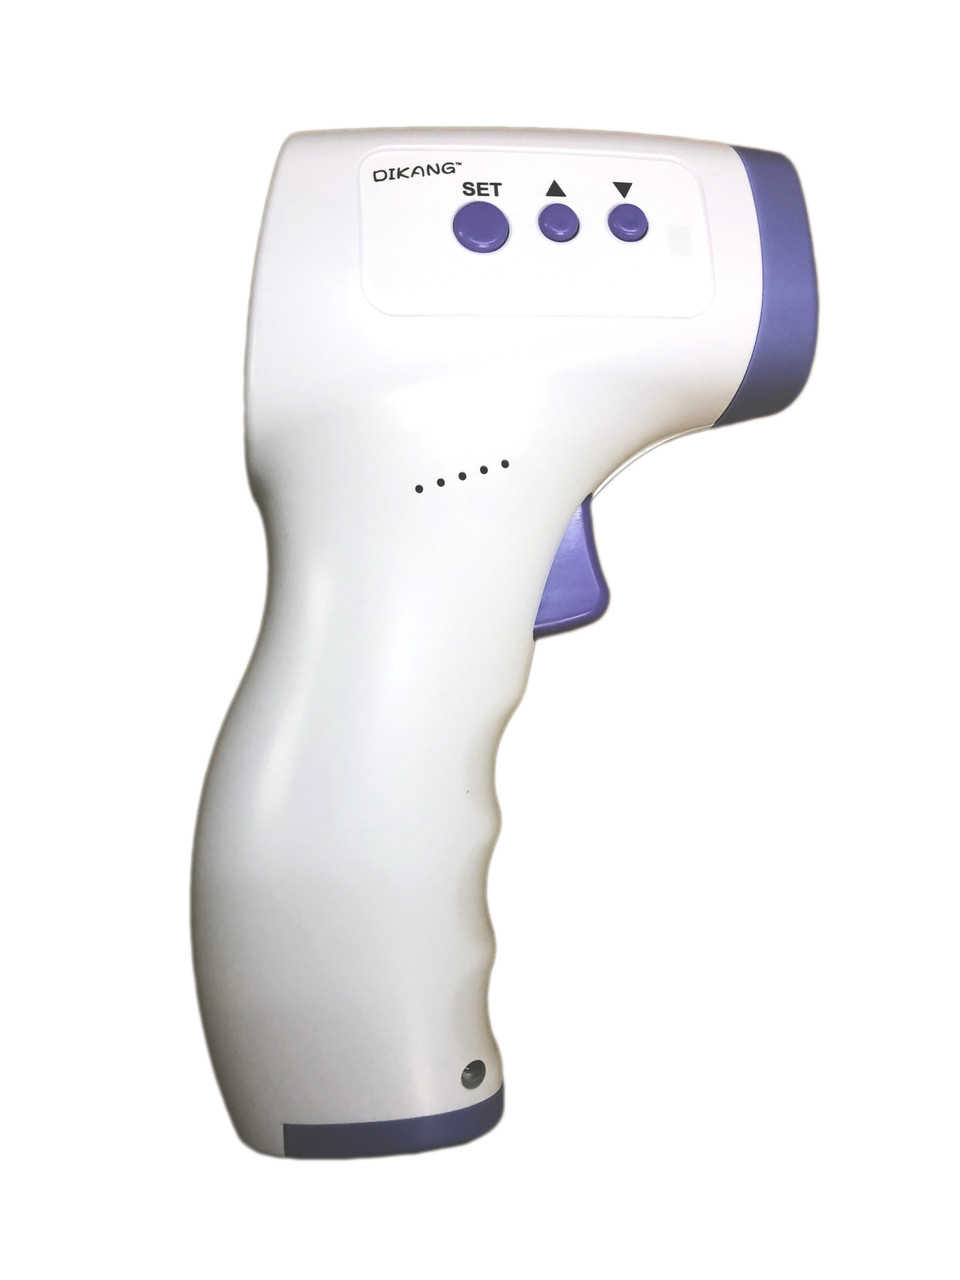 https://cdn11.bigcommerce.com/s-o23pa314c0/images/stencil/1280x1280/products/2536/4544/dikang_medical_infrared_thermometer_jaken_medical_ppe__39415.1589732022.jpg?c=2?imbypass=on